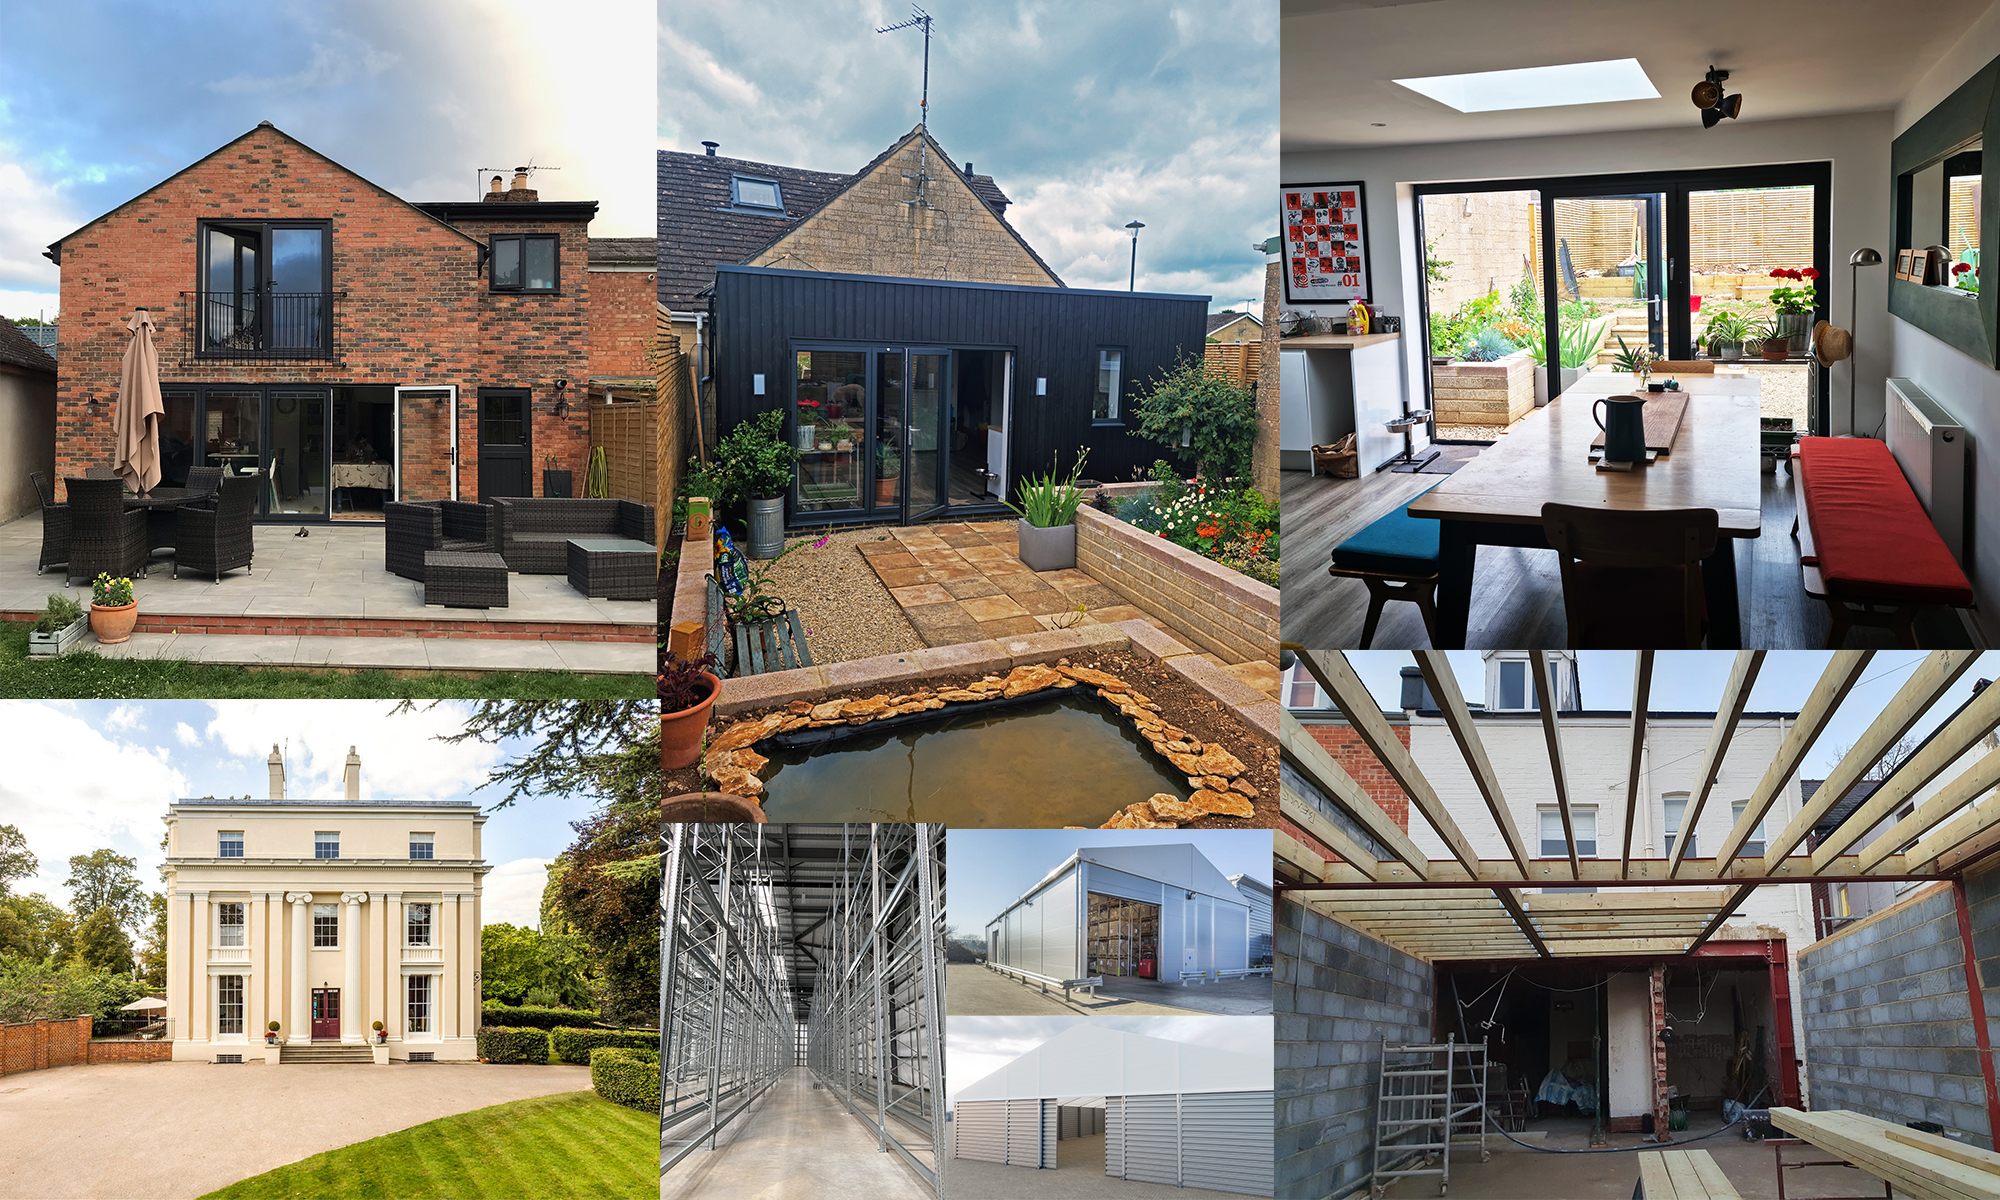 Image of the architect's portfolio showcasing their extension projects. The projects include single and two-story extensions to residential properties, each designed to seamlessly integrate with the existing structure while adding new living spaces. The extensions are built using a variety of materials, such as timber, brick, and glass, and feature unique architectural elements, such as skylights, bi-folding doors, and outdoor living areas. The image is a collection of several photos, each showcasing a different extension project, with the colors and textures of the materials used adding visual interest and depth to the display.